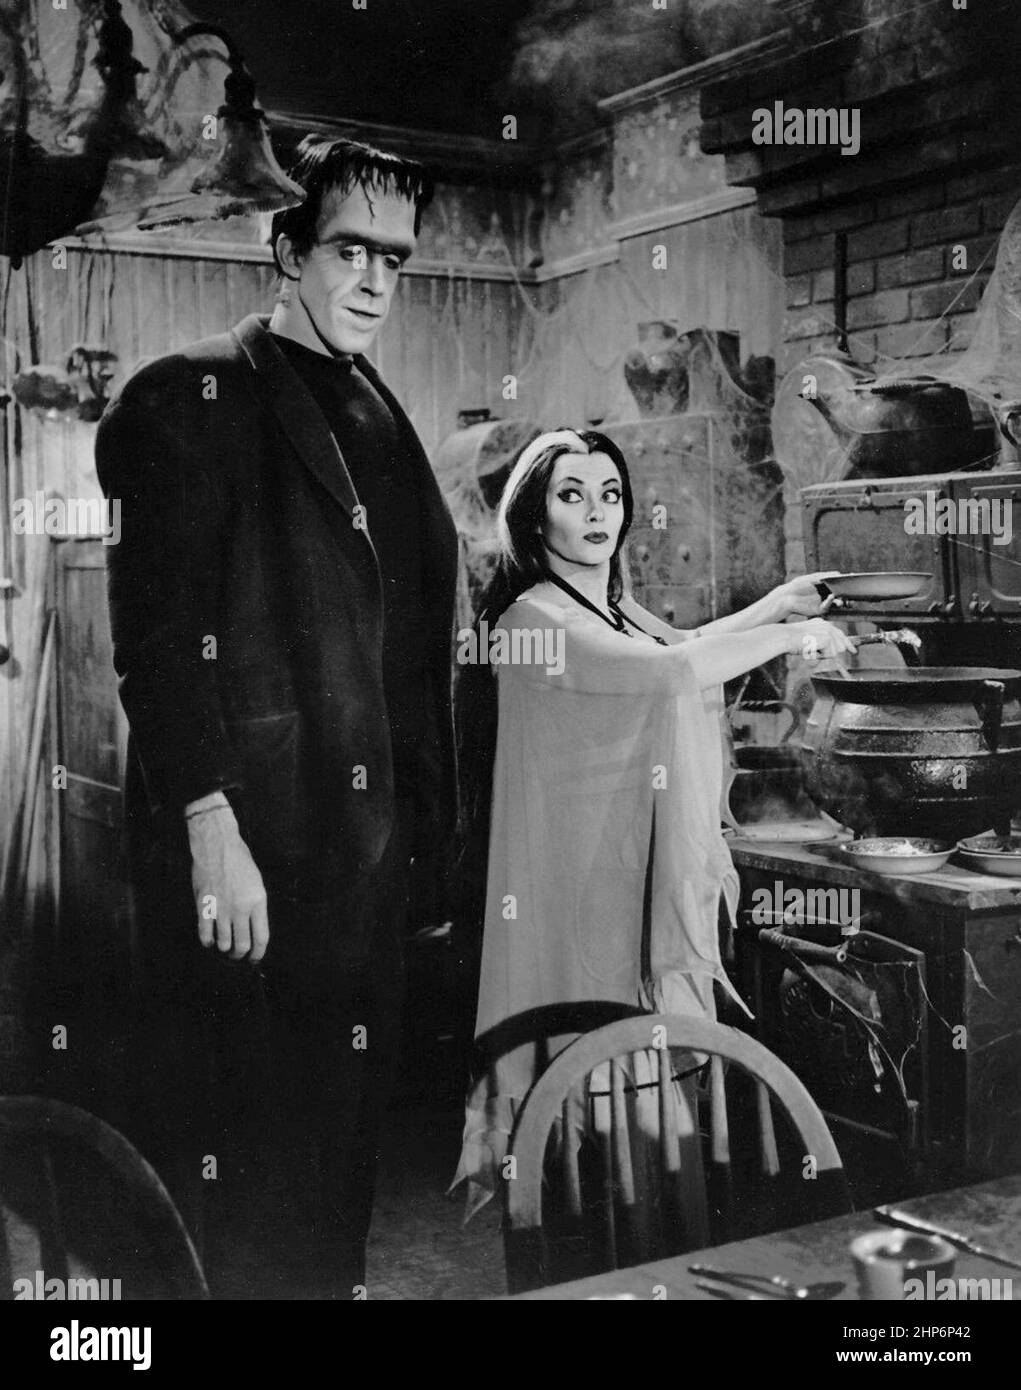 Photo of Fred Gwynne (Herman Munster) and Yvonne DeCarlo as his wife, Lily, from the television program The Munsters. Stock Photo